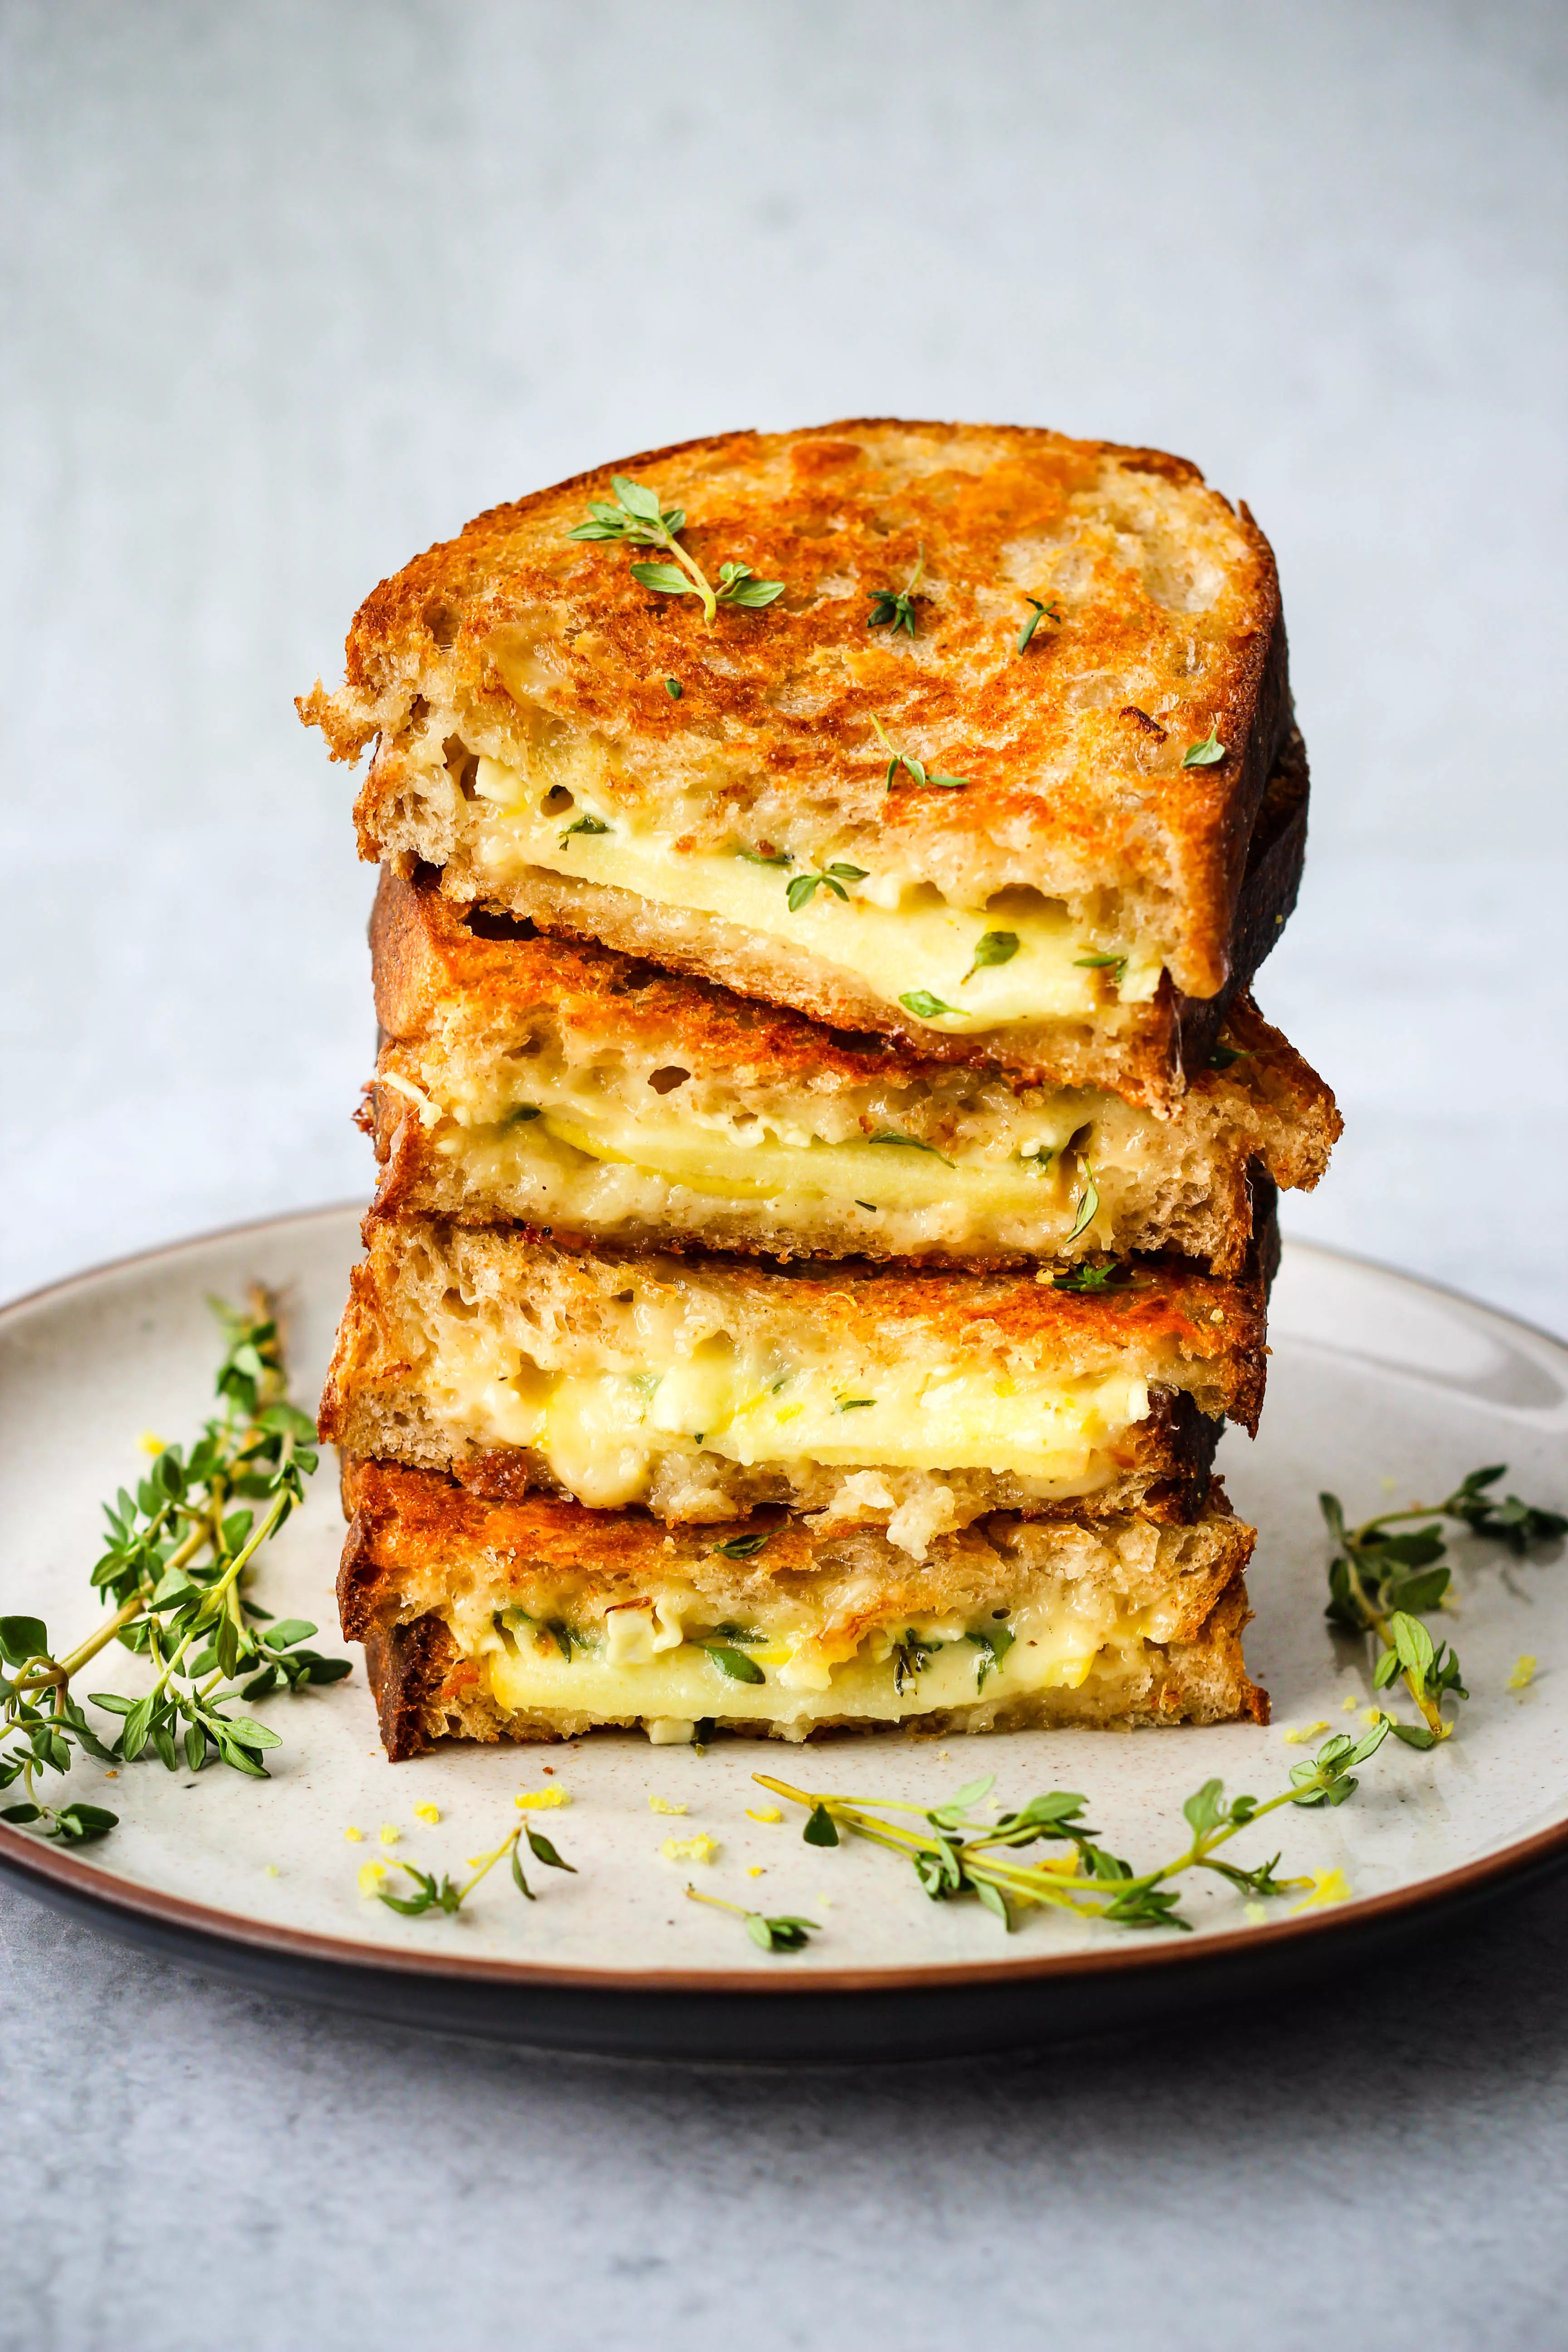 Grilled Sandwich Recipes